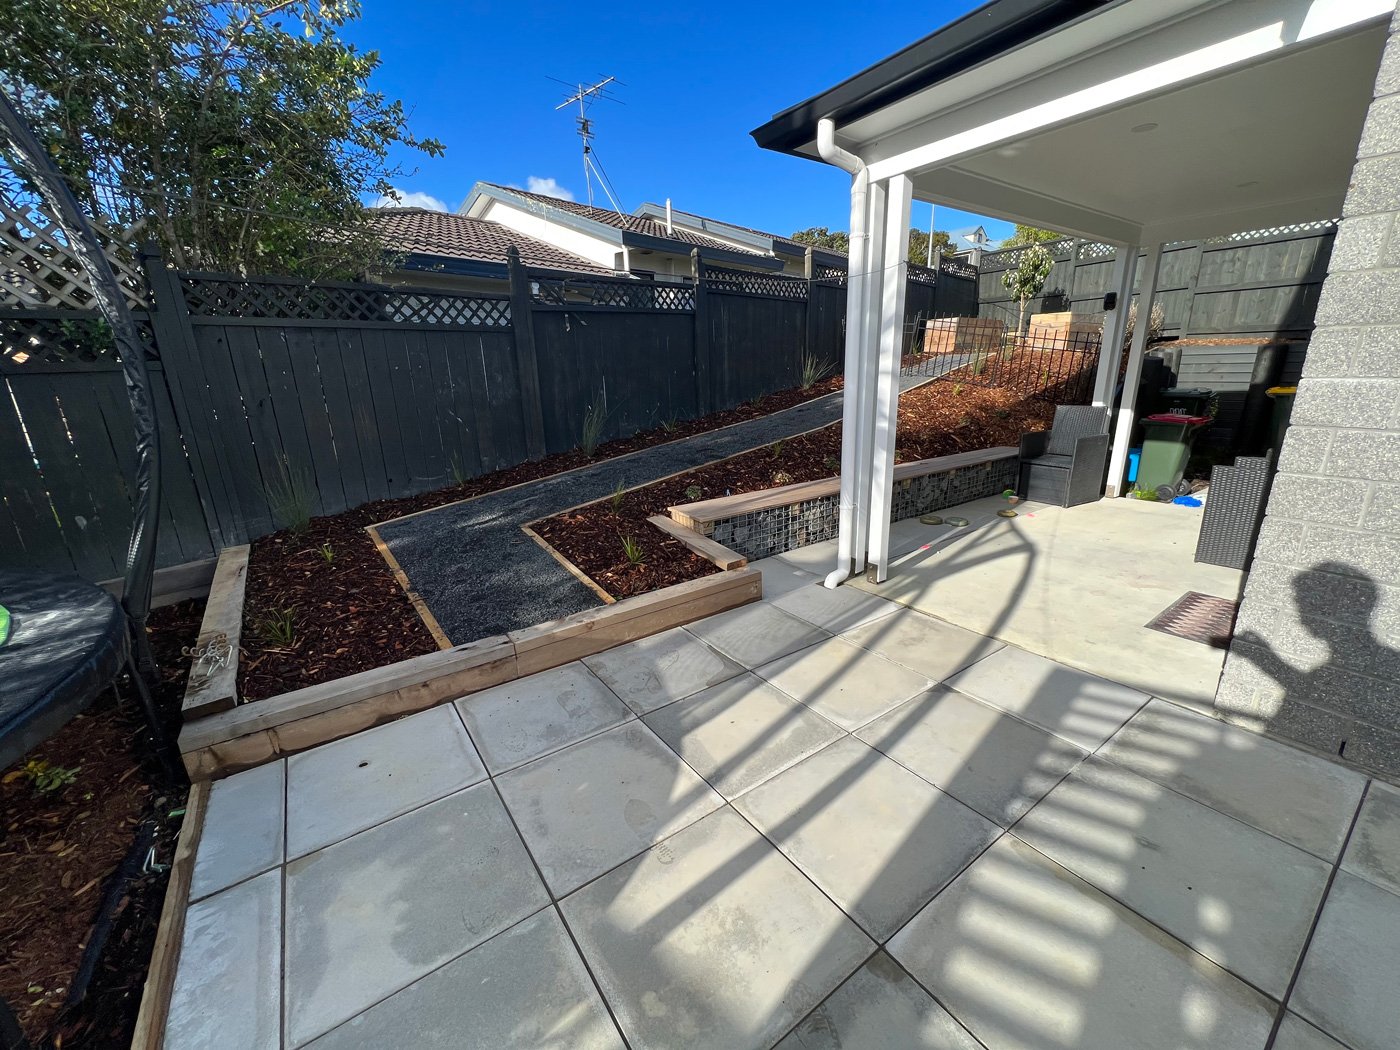 Concrete tiled backyard area with a gravel path outlined with wood and supported by a stone and wood retaining wall